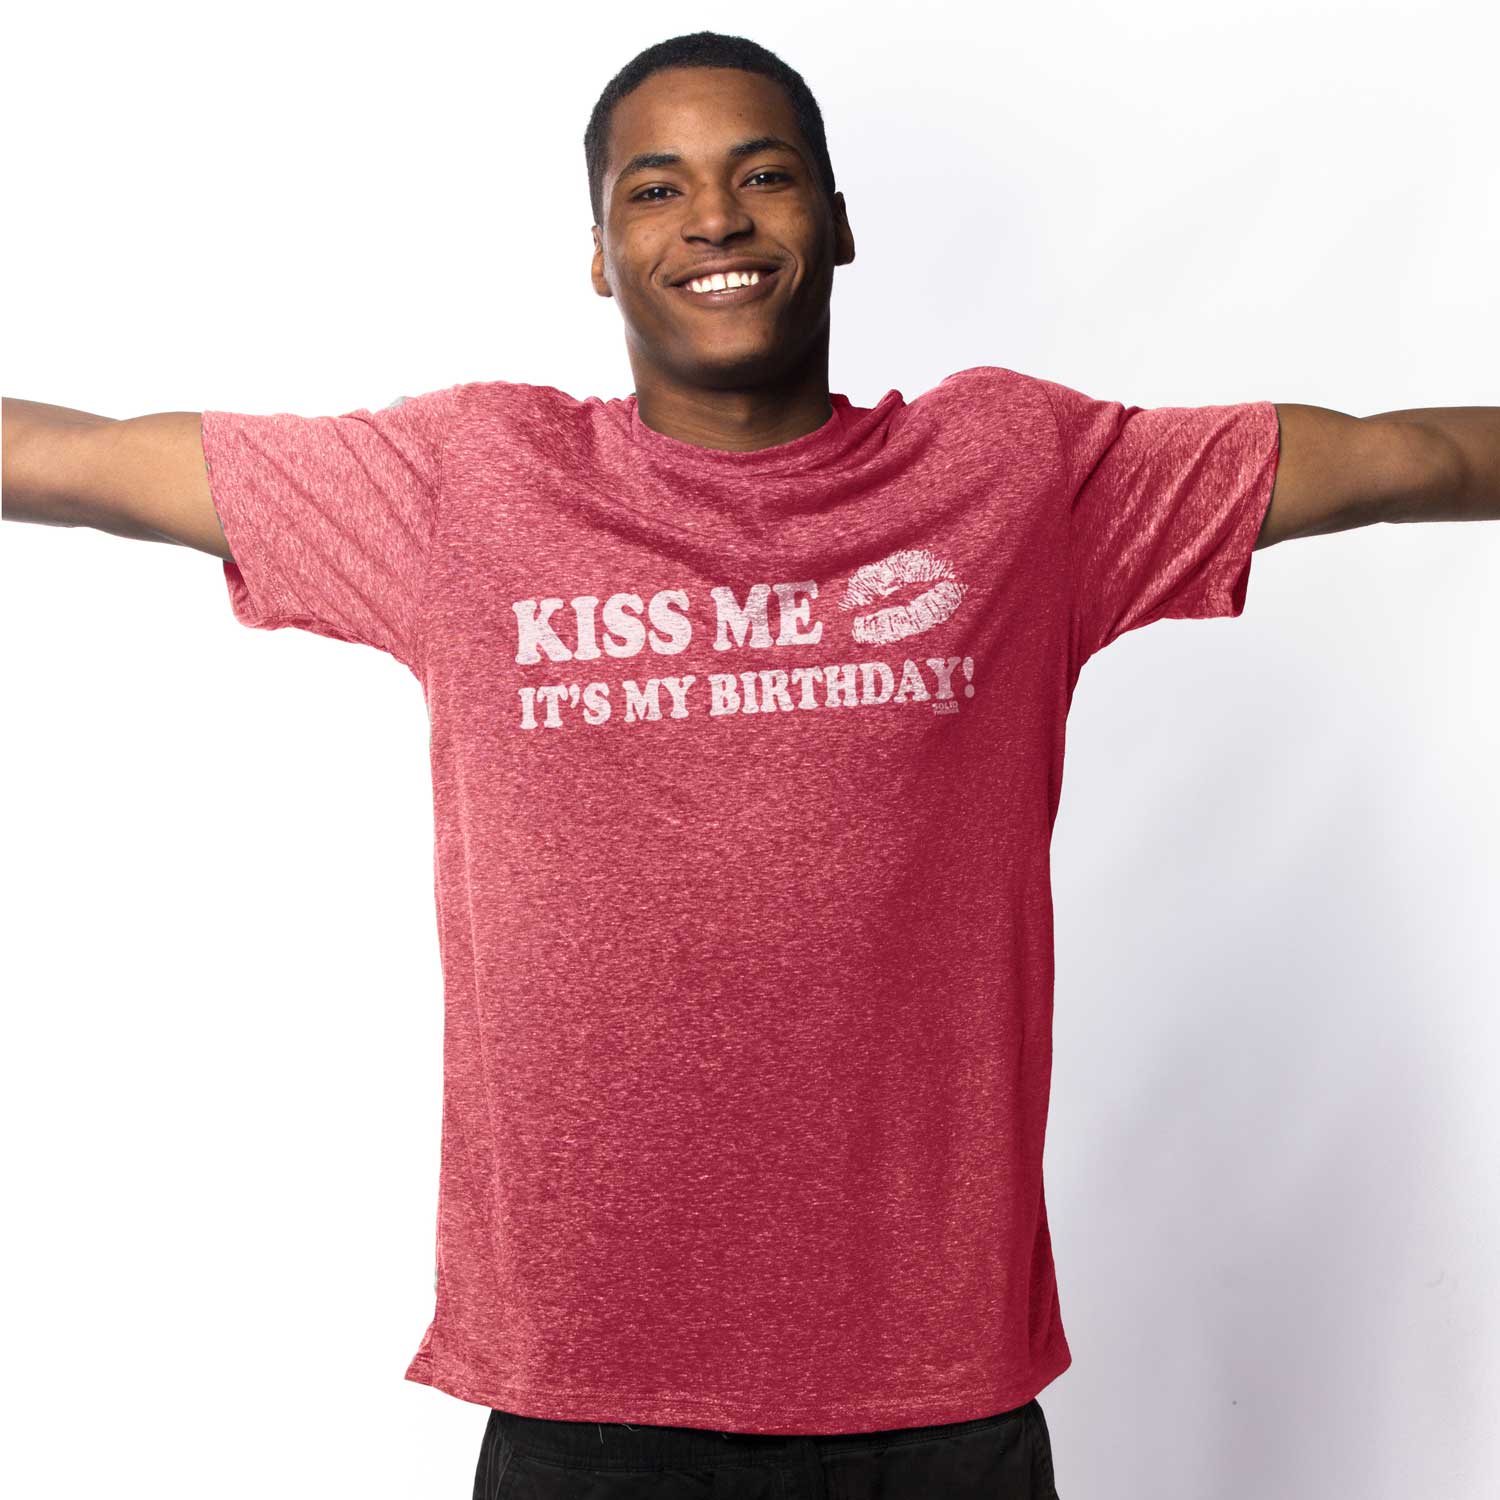 Men's Kiss Me It's My Birthday Cool Celebration Graphic T-Shirt | Funny Party Tee | Solid Threads